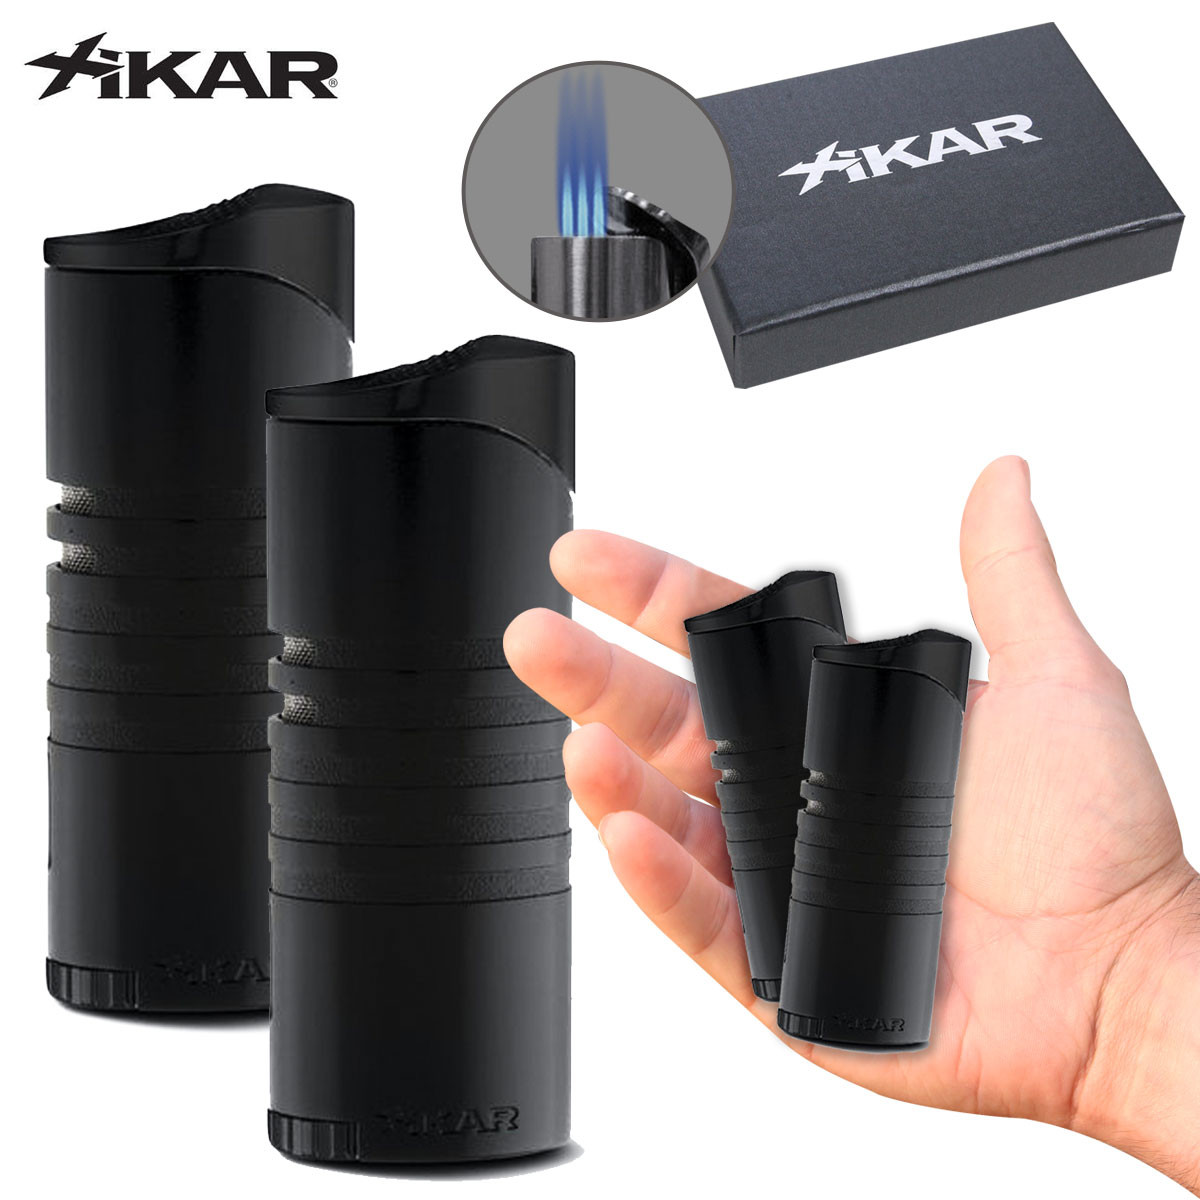 Set of 2: Xikar Ellipse III Triple Flame Lighter $35 + Free Shipping at CigarPage